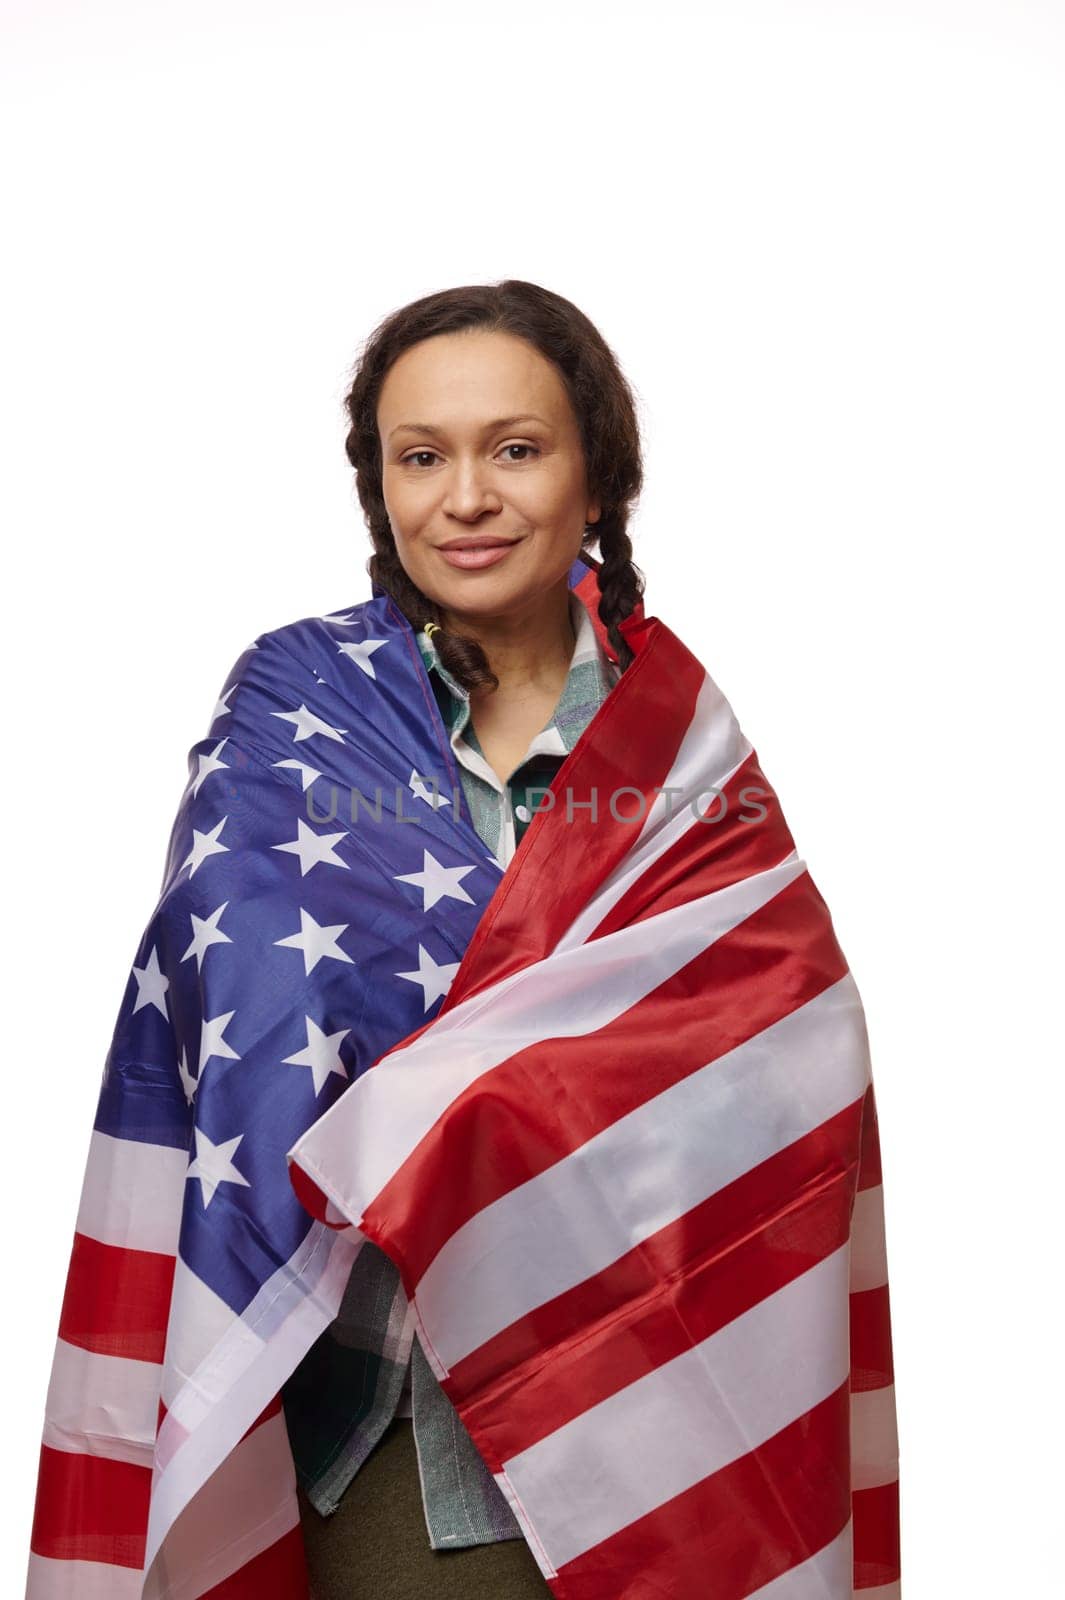 Proud multiethnic woman wrapped in United States of America flag, looking at camera on isolated white background by artgf